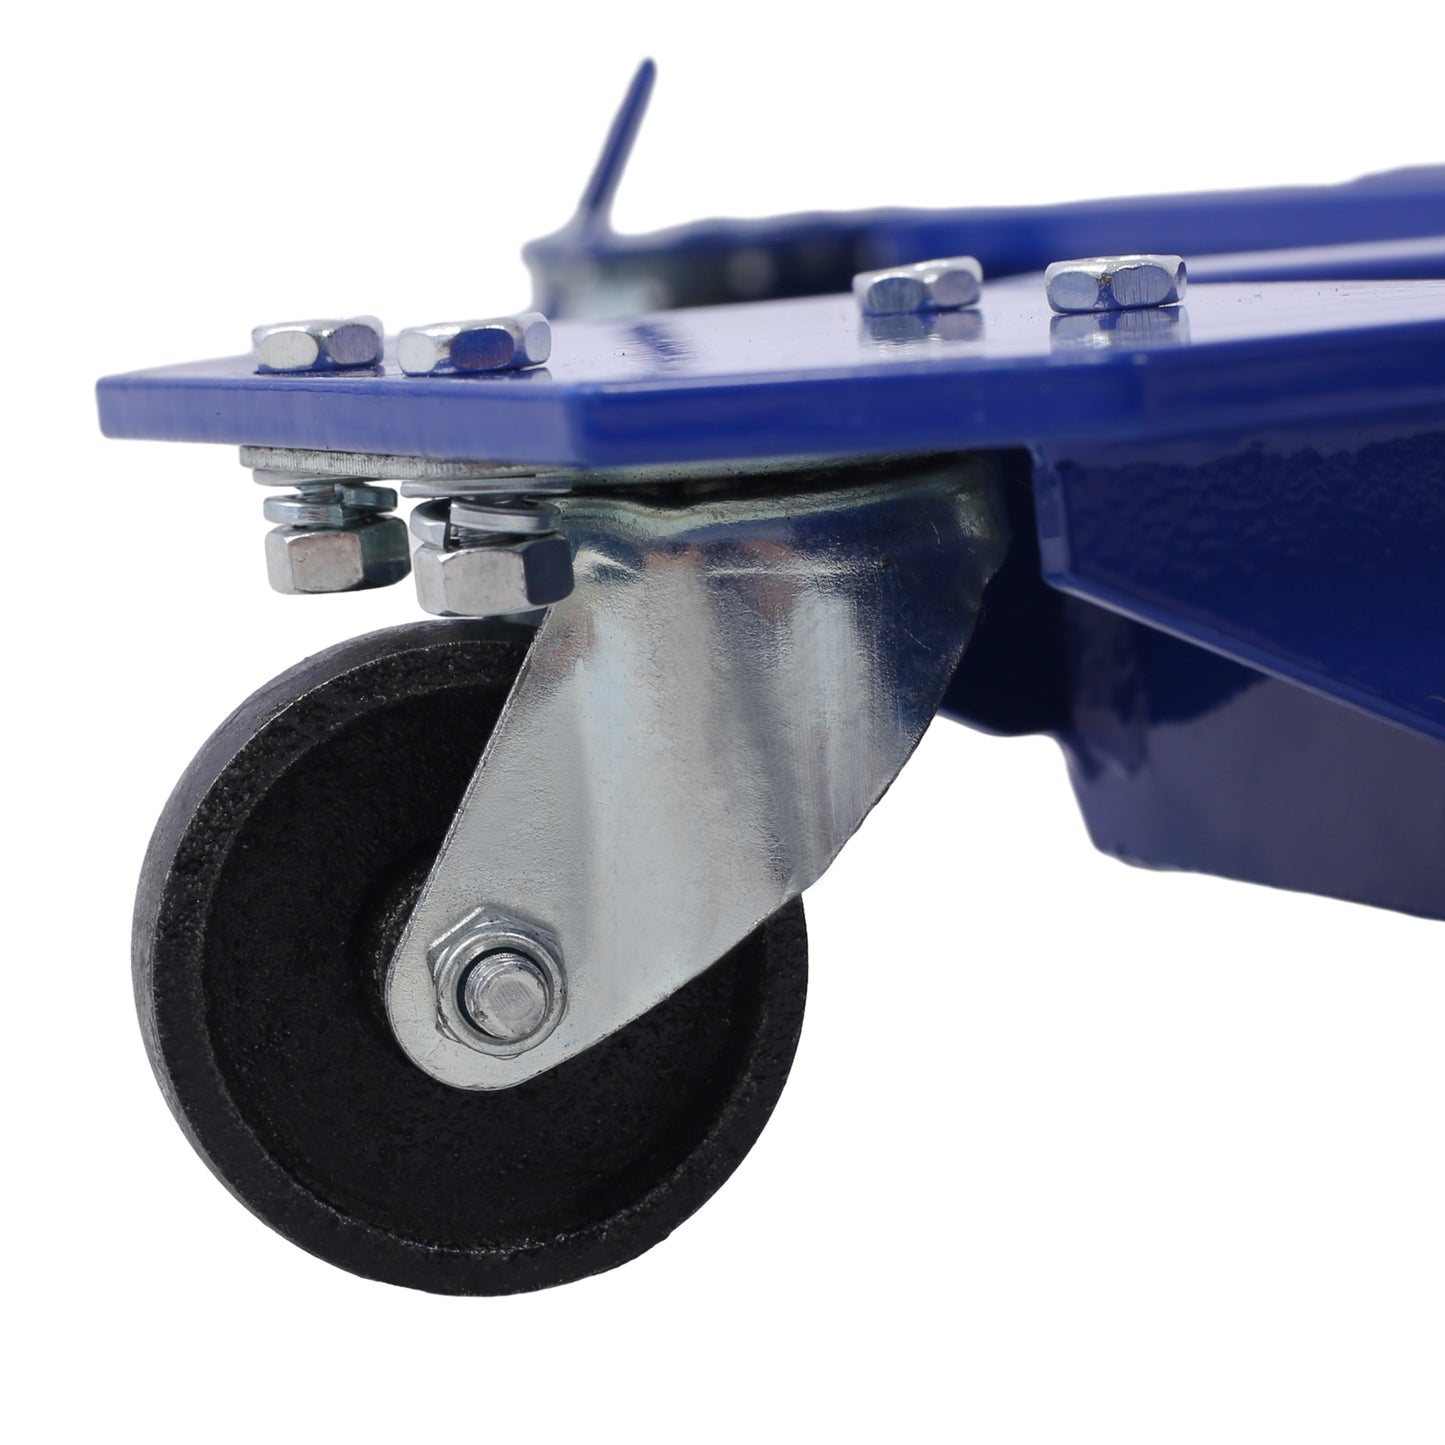 Motorcycle Dolly 1250 lbs. Widow Cruiser-Dolly Steel Motorcycle Dolly Blue